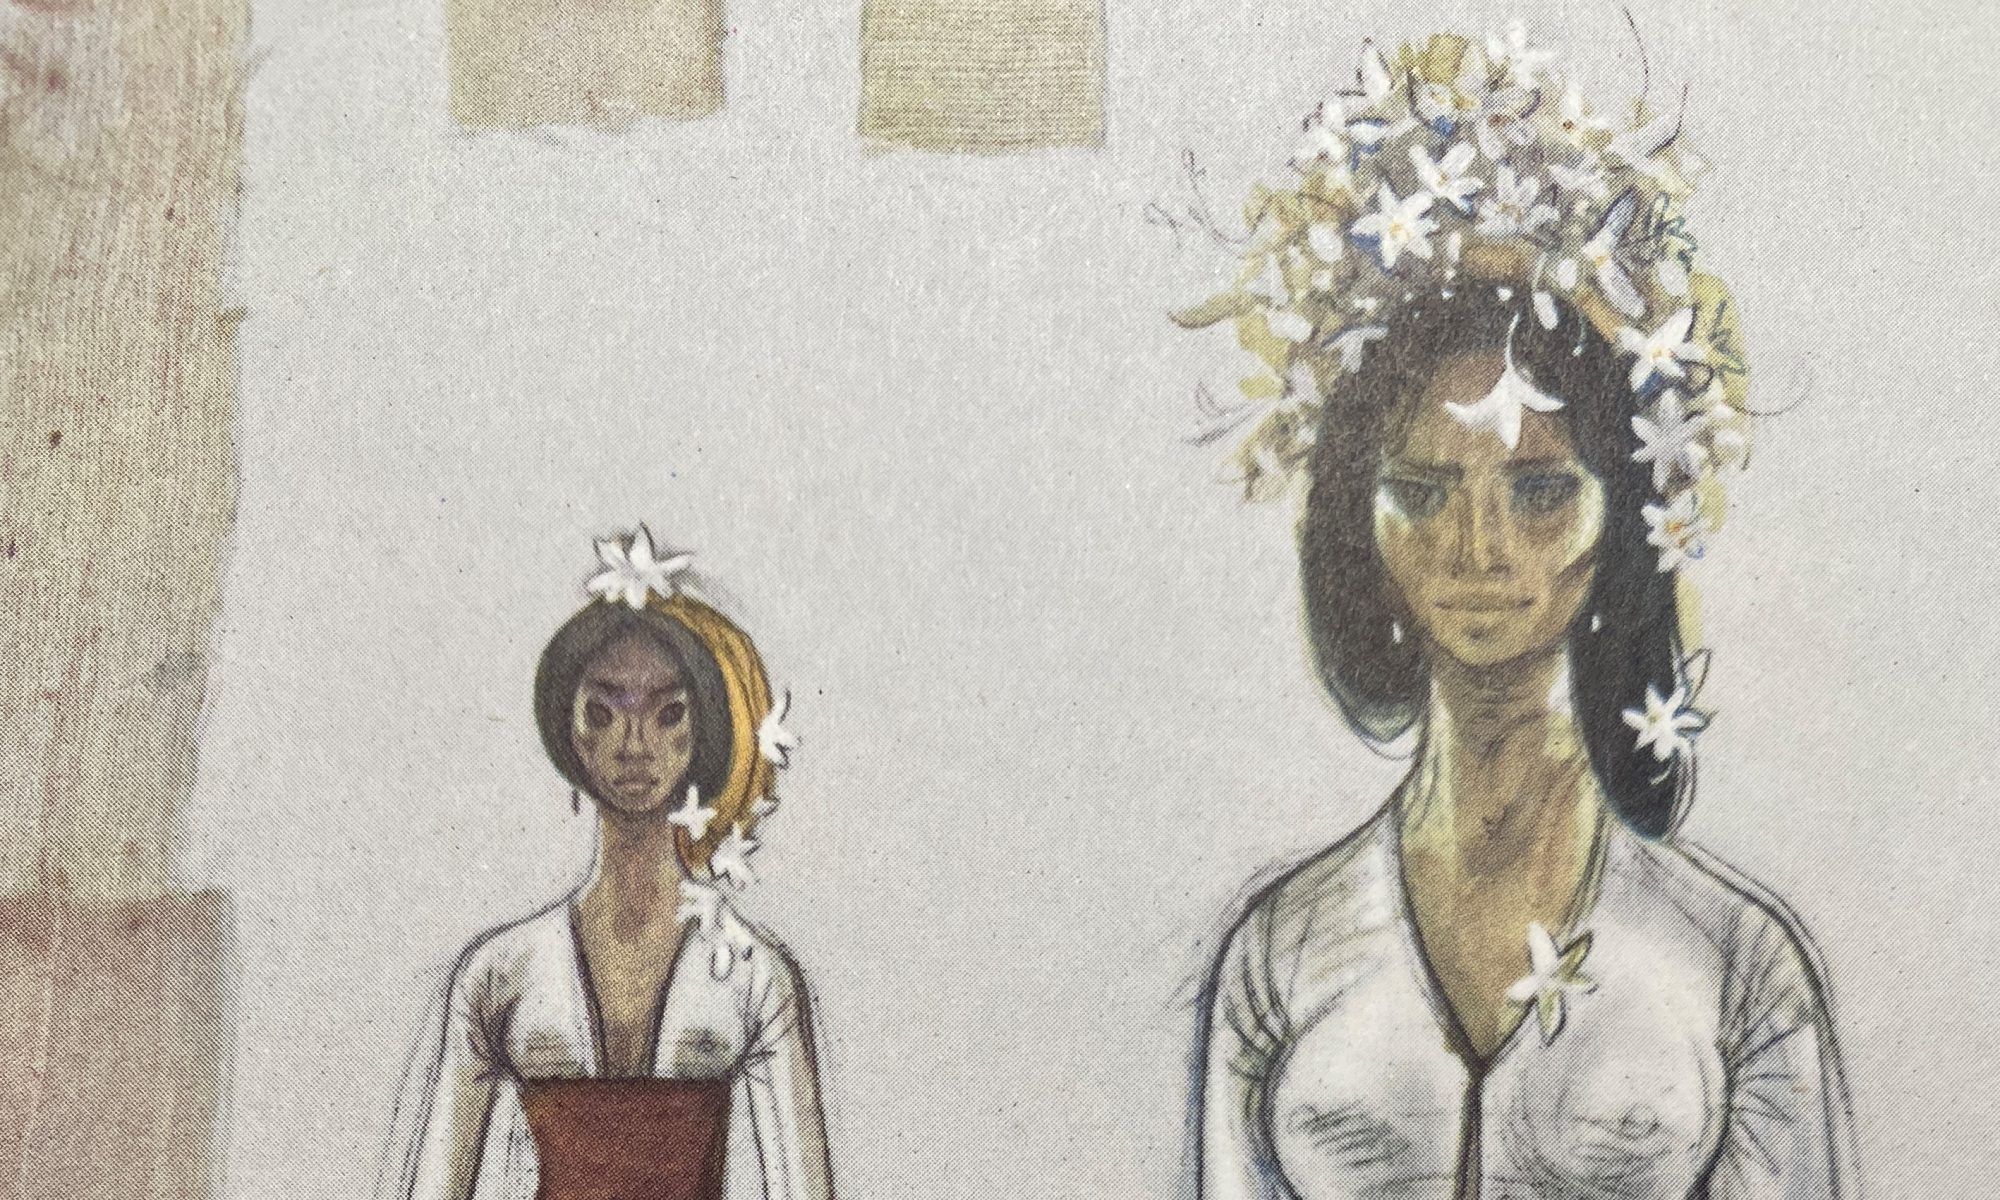 Drawings of women's costumes from the film production of South Pacific